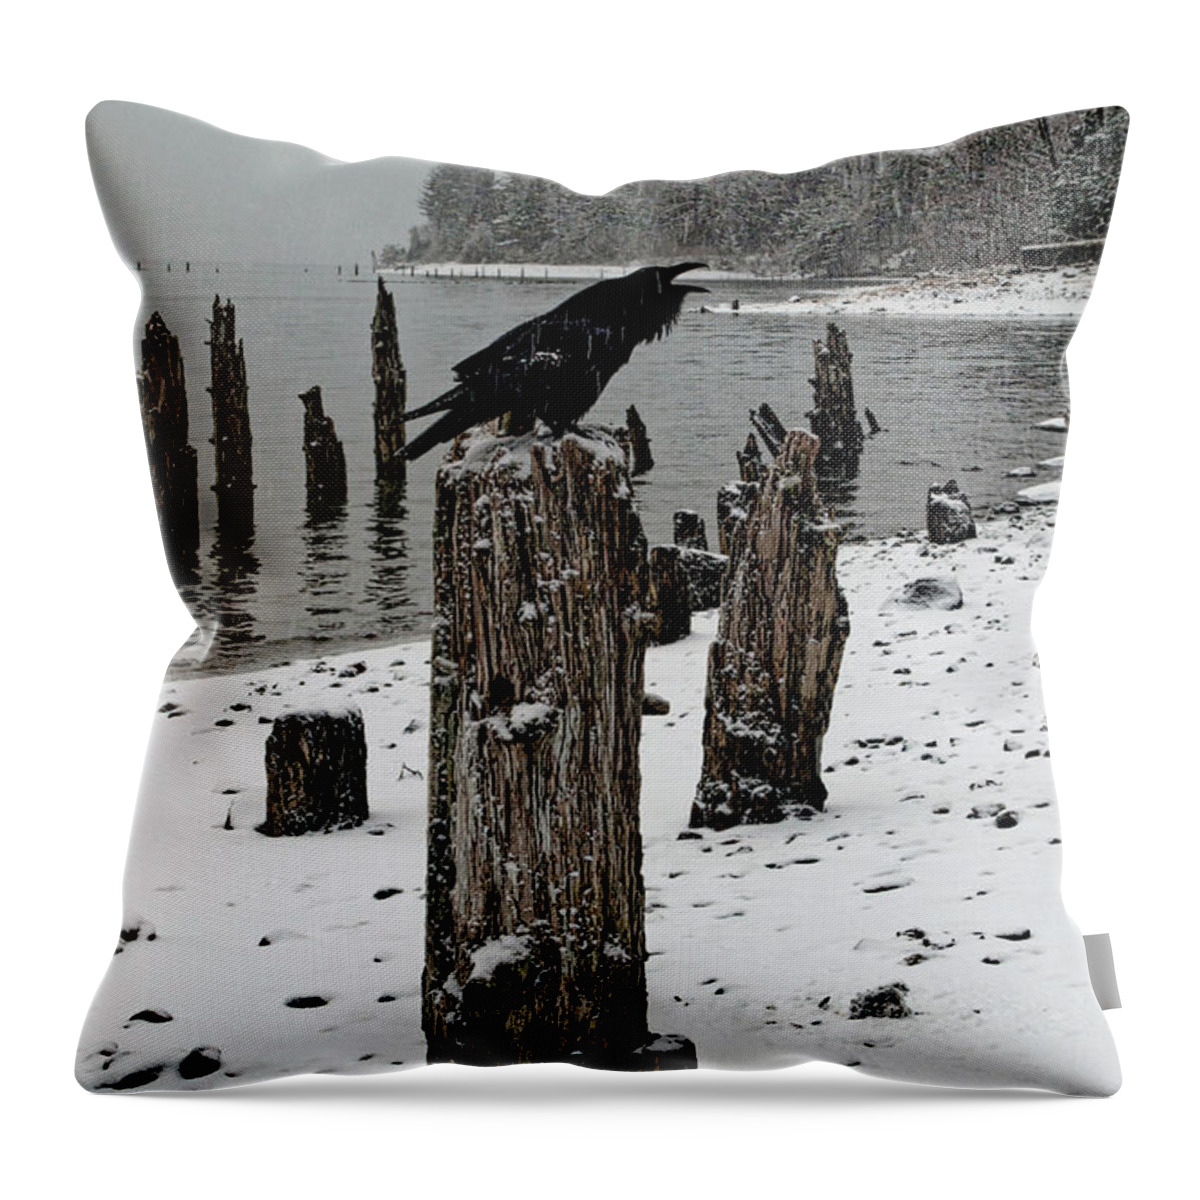 Raven Throw Pillow featuring the photograph Raven Call by Cathy Mahnke